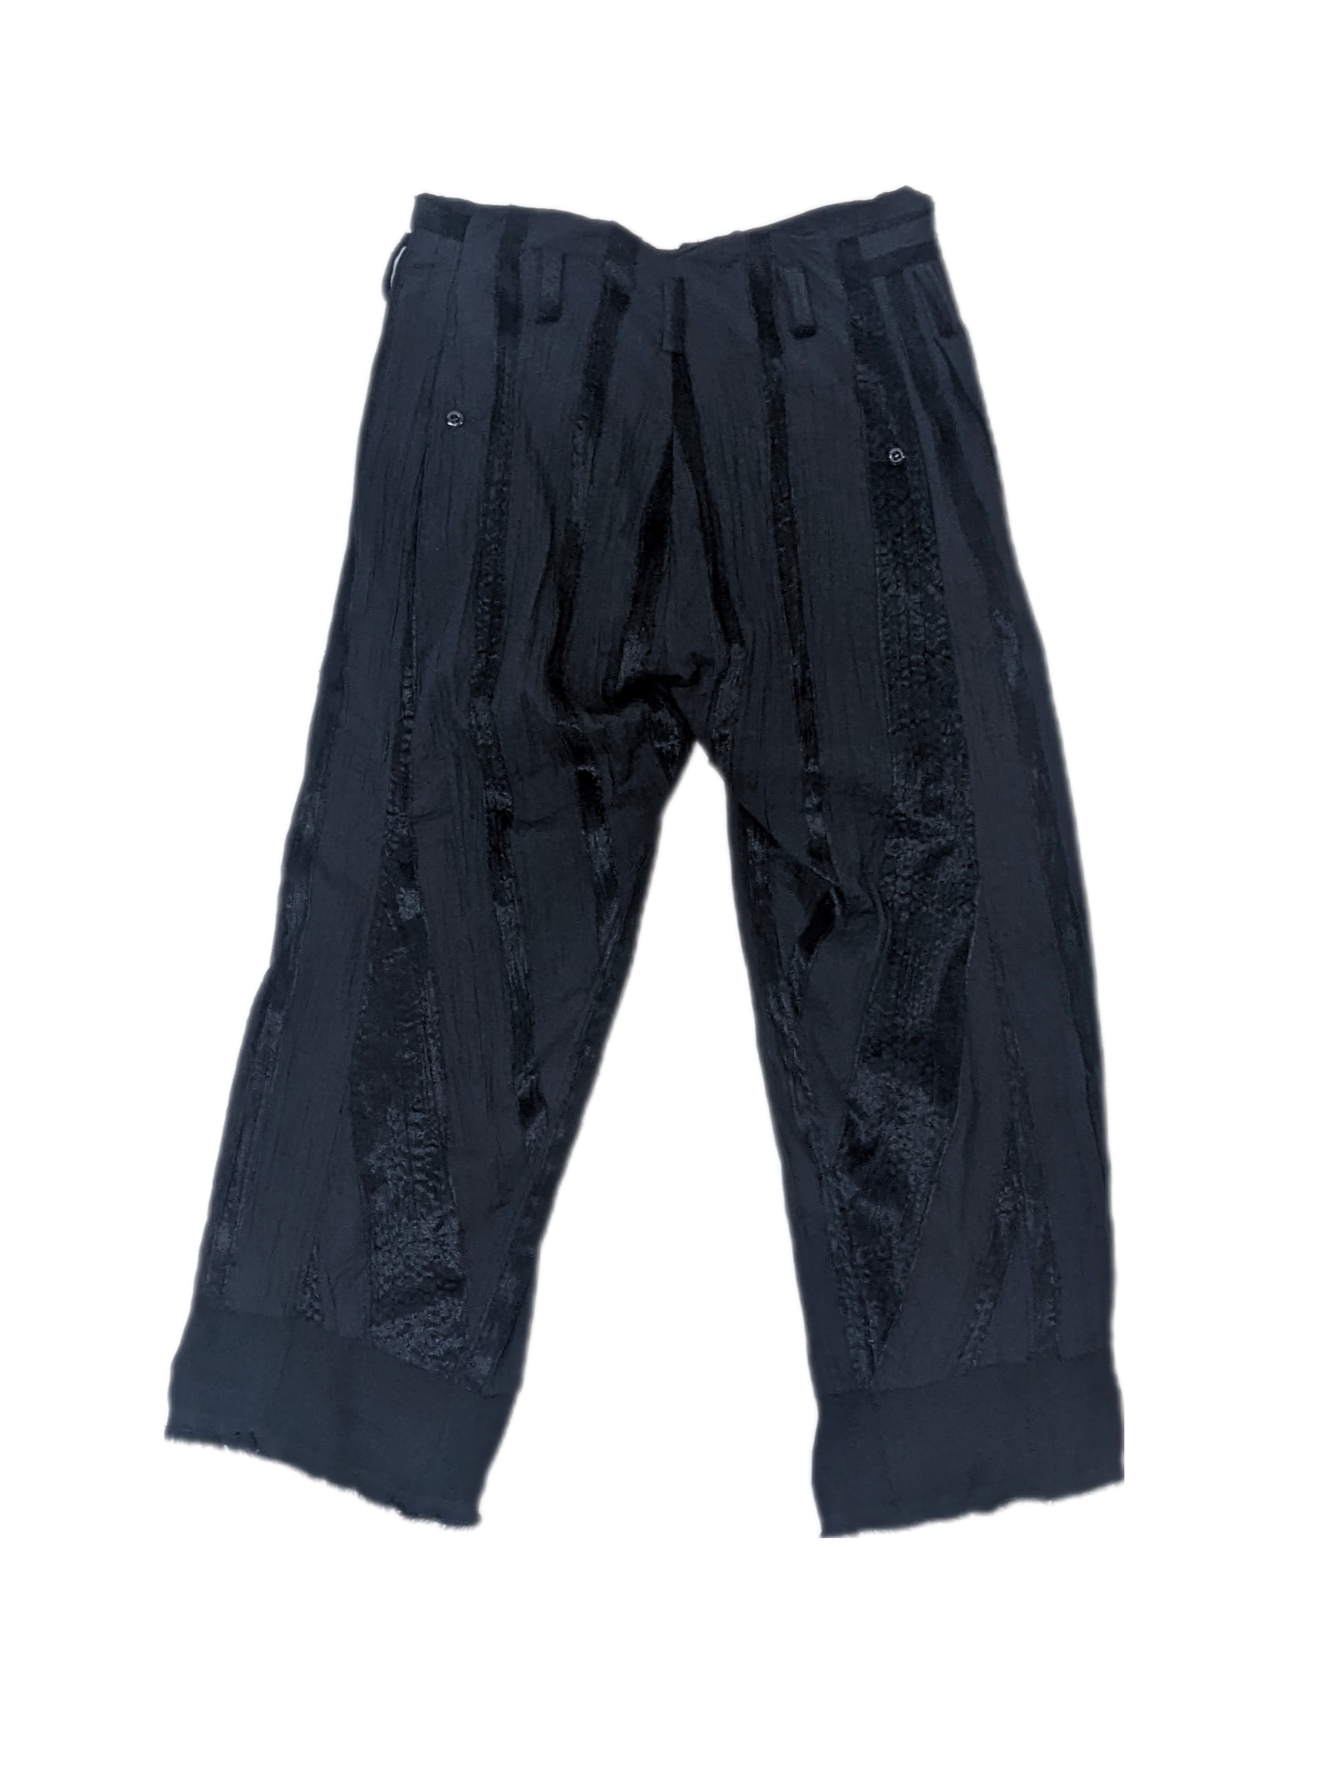 Denim Front Kickback Trousers with Elongated Lining with Dart Pockets in Black Velvet & Cotton Stripe